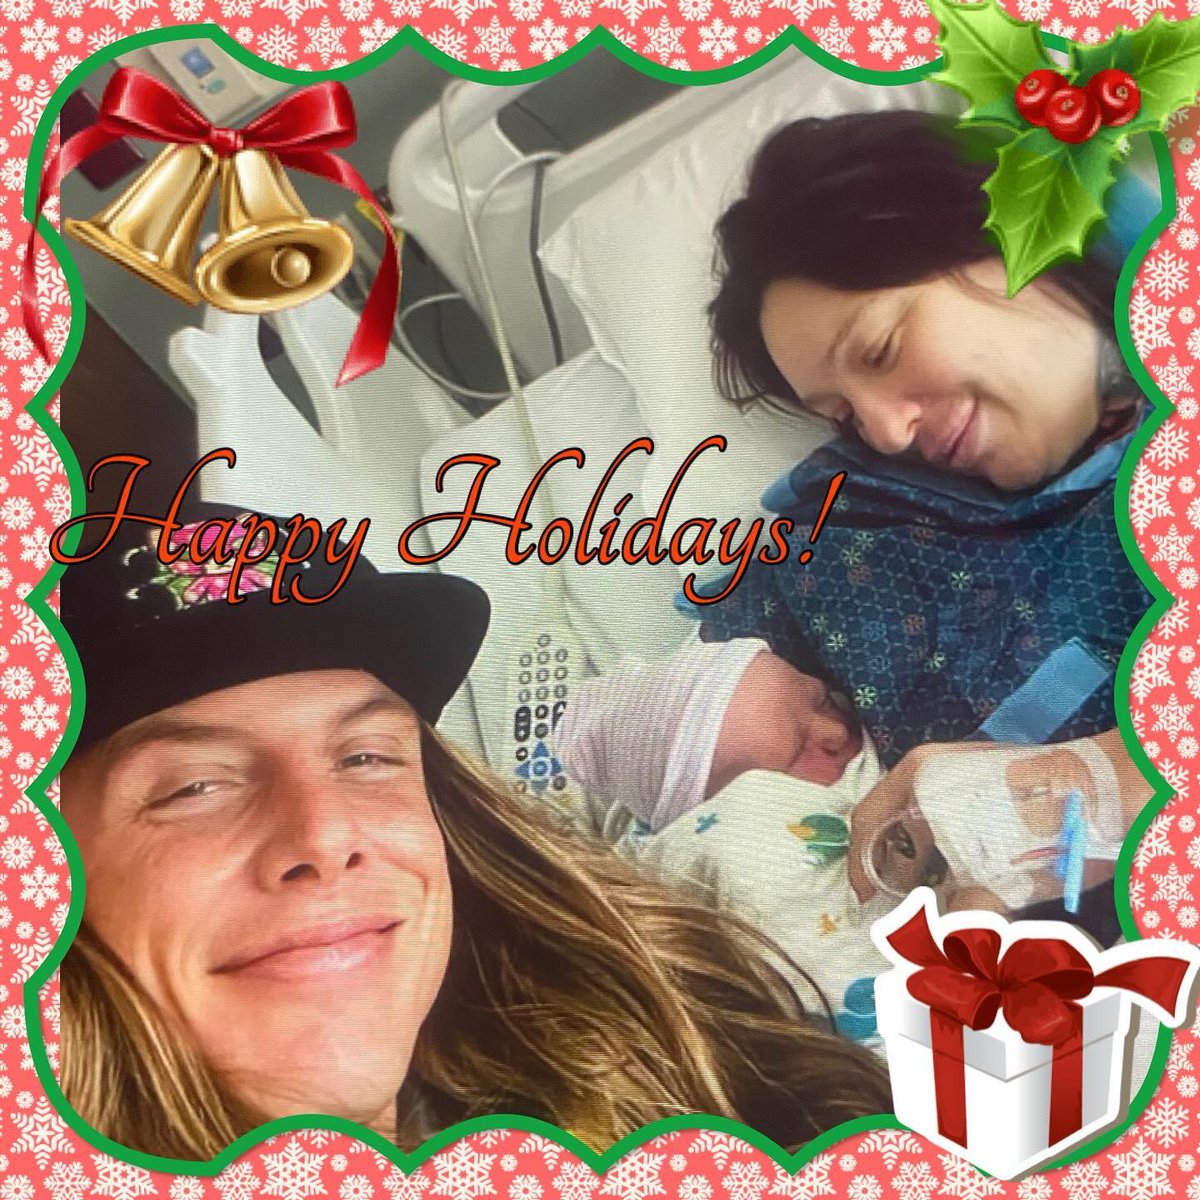 Also a Happy Mother's Day to @themishamontana,the girlfriend of @SuperKingofBros and mom to baby Matt and a super cool person(just like Matt).